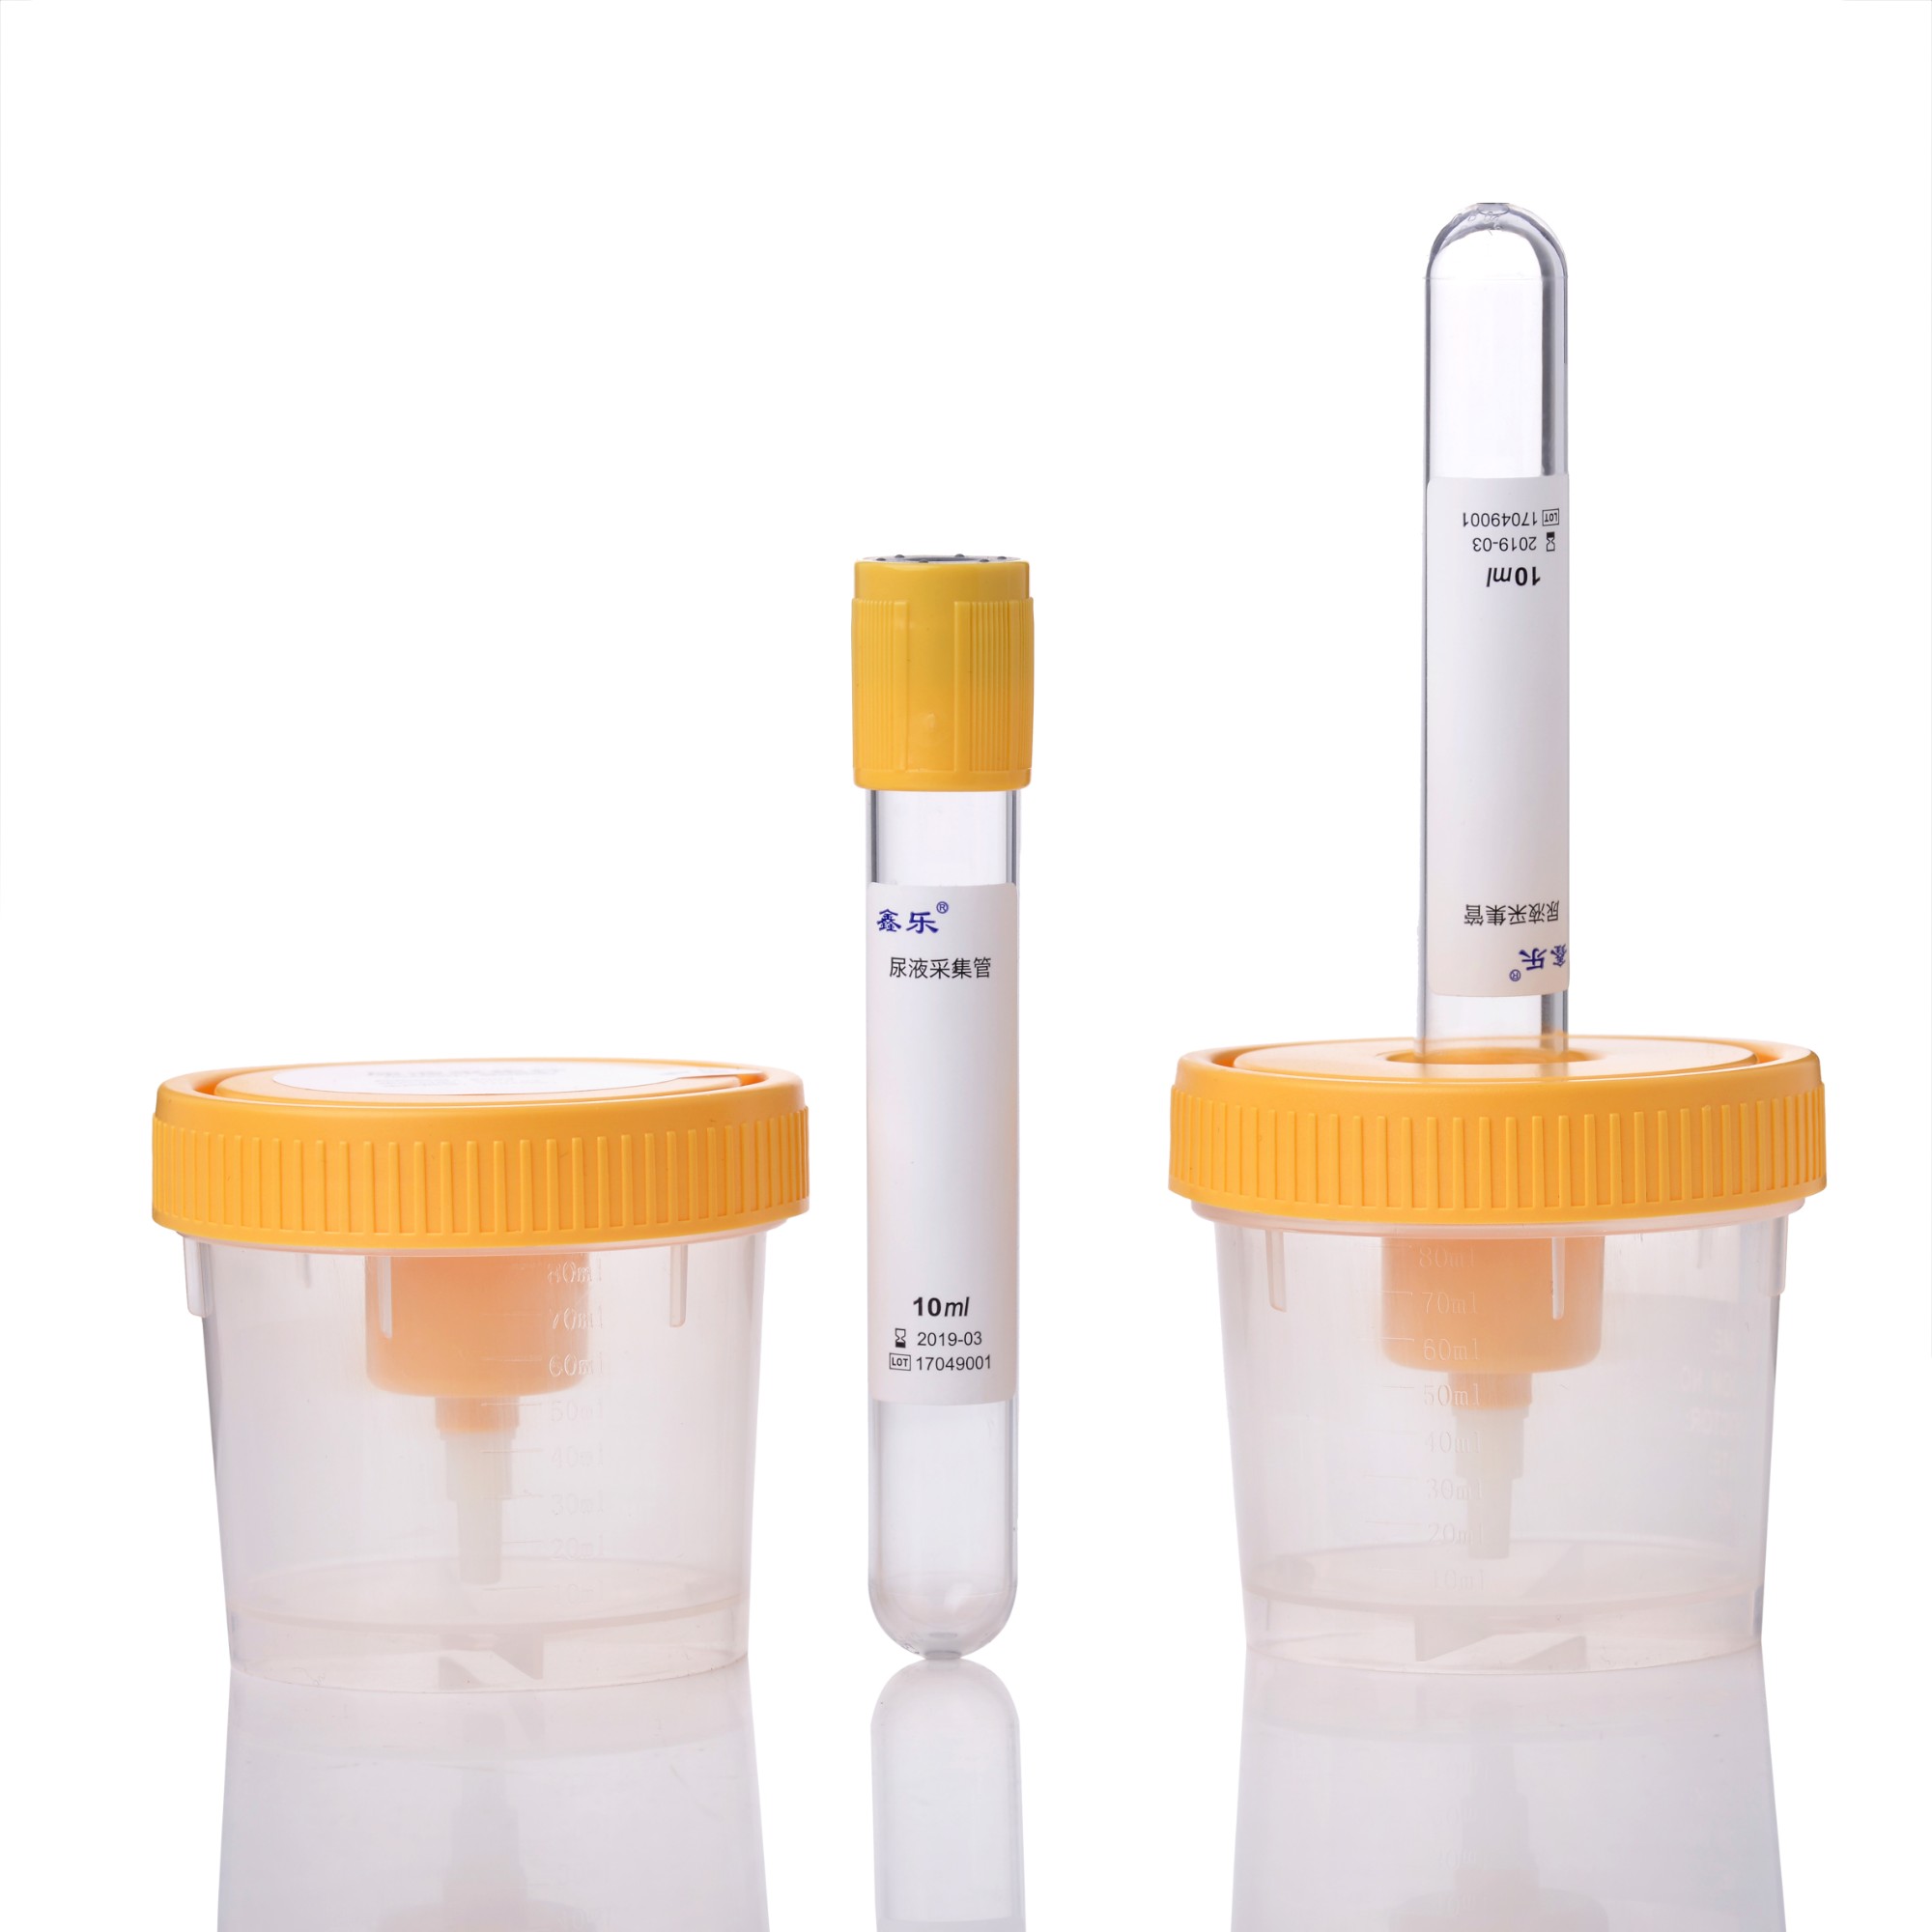 Urine collection system